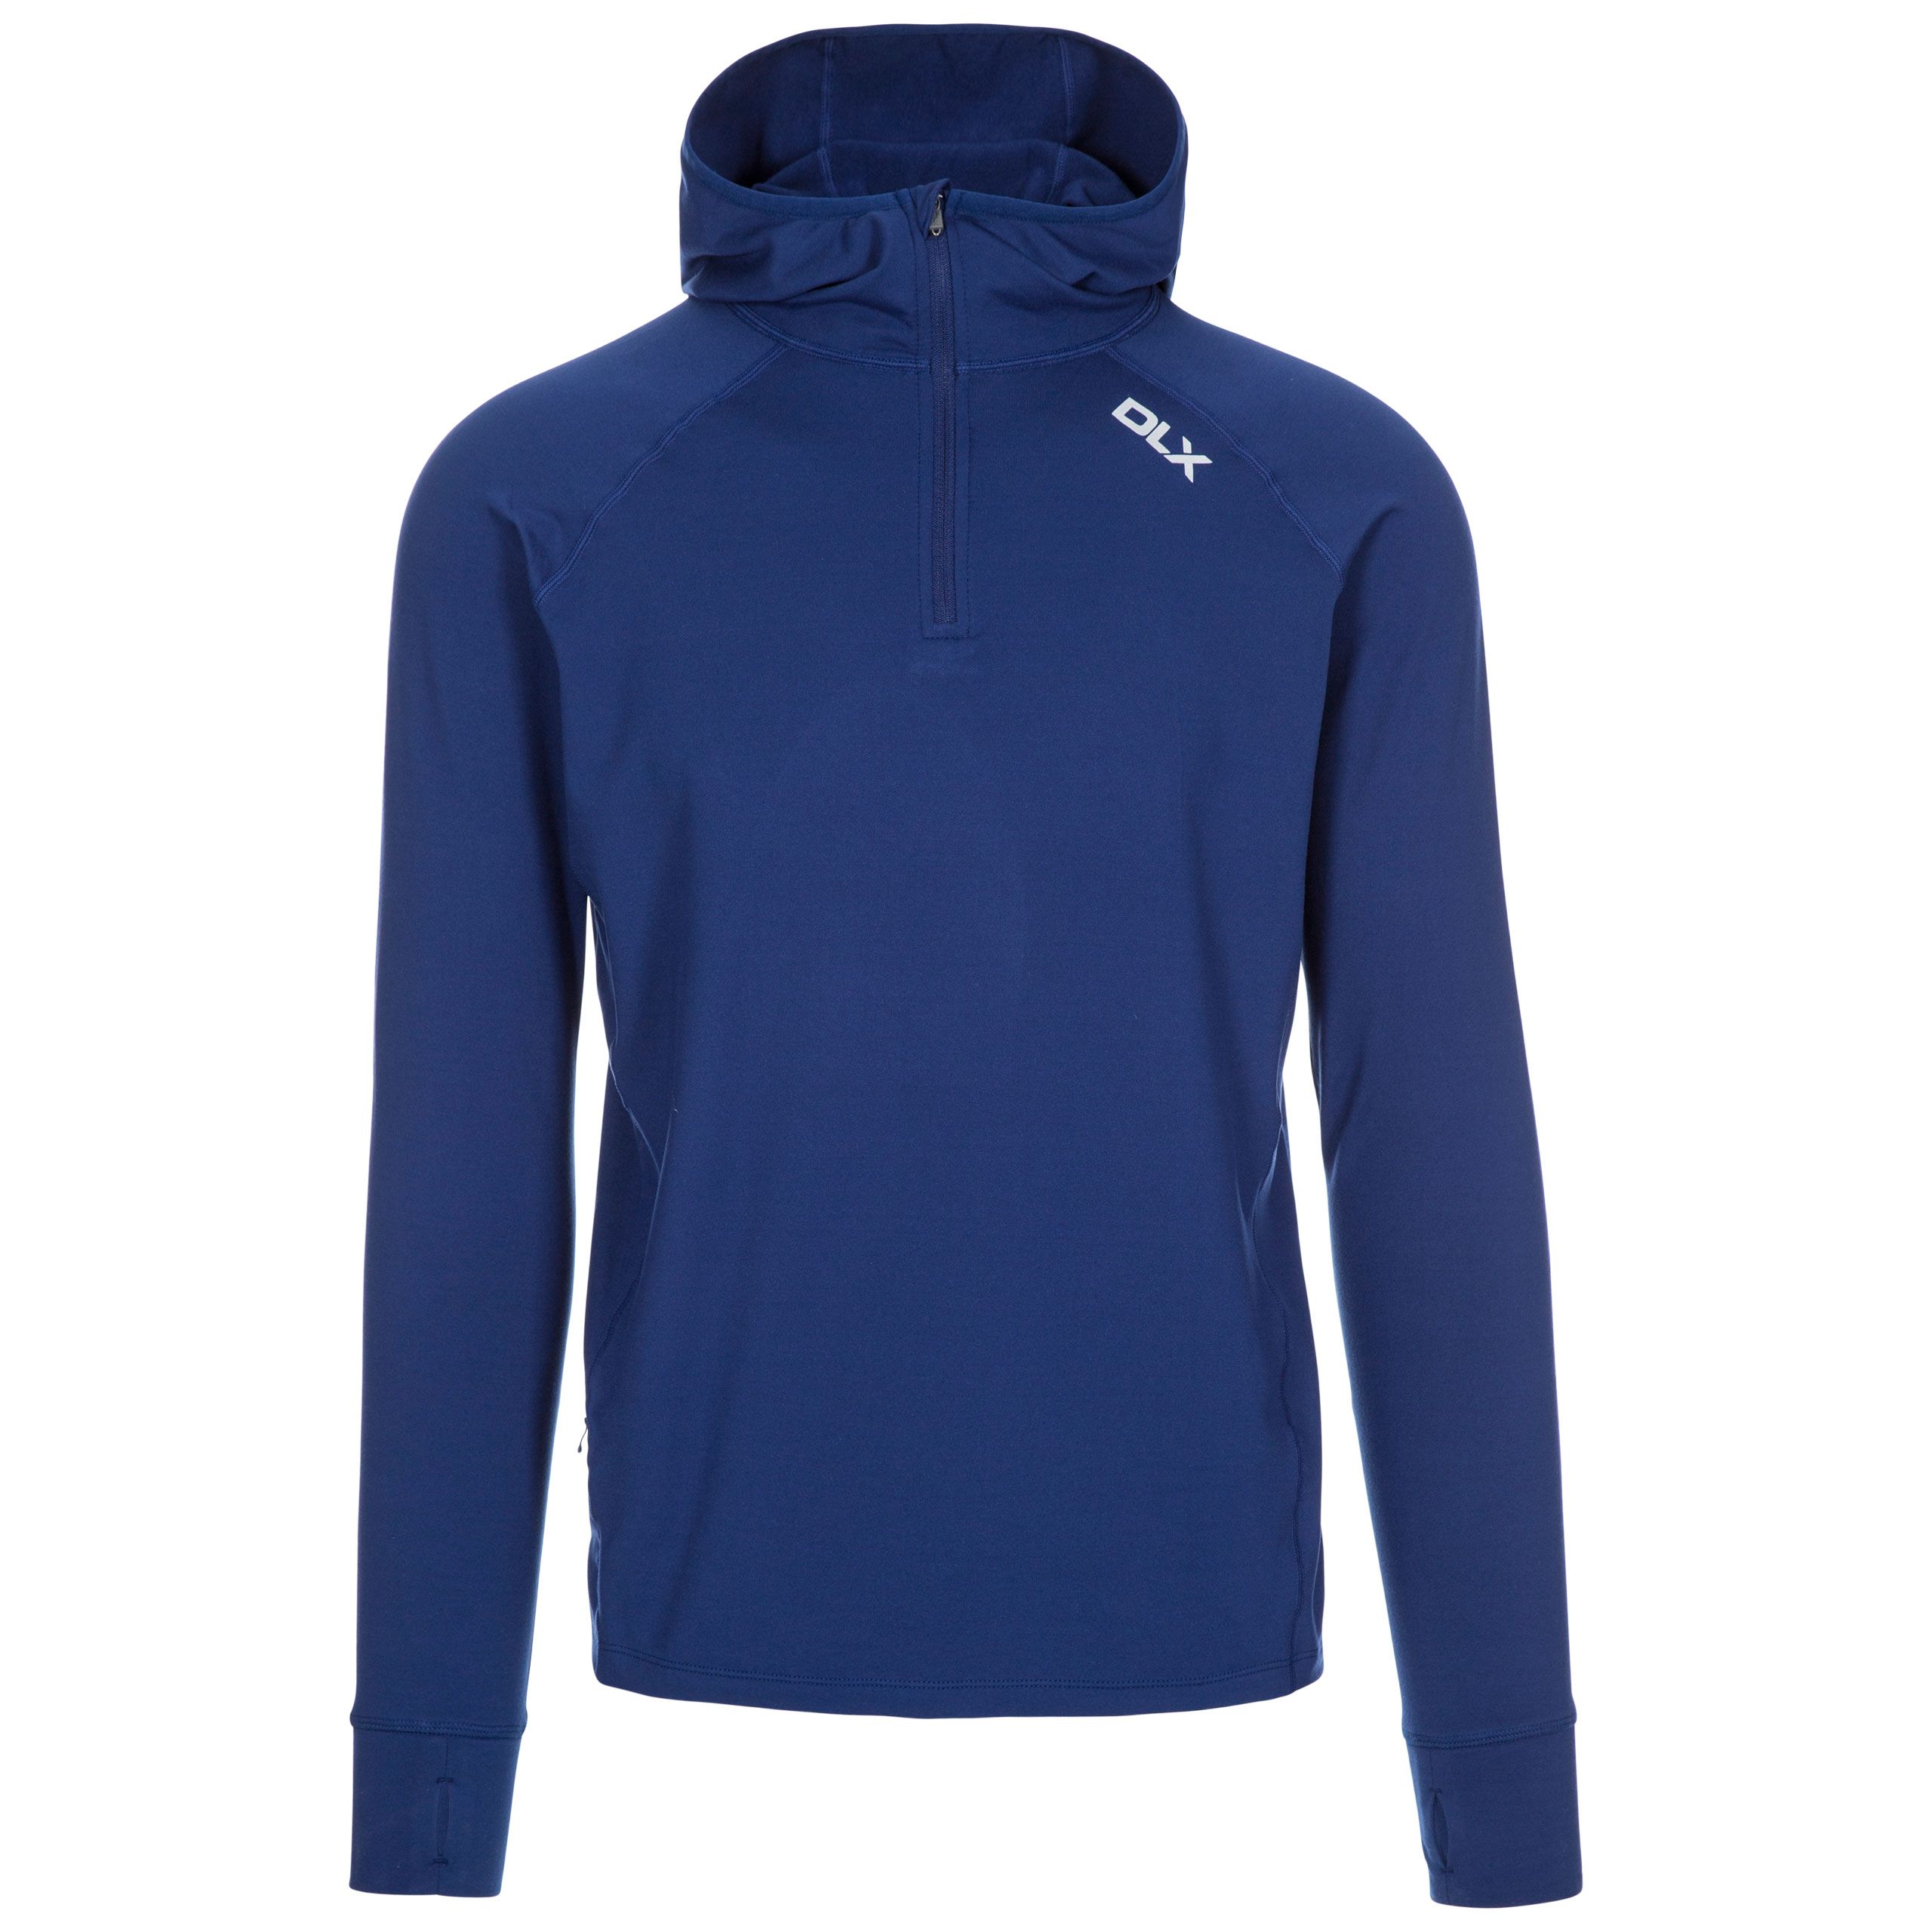 Robins Mens Dlx Hooded Active Top